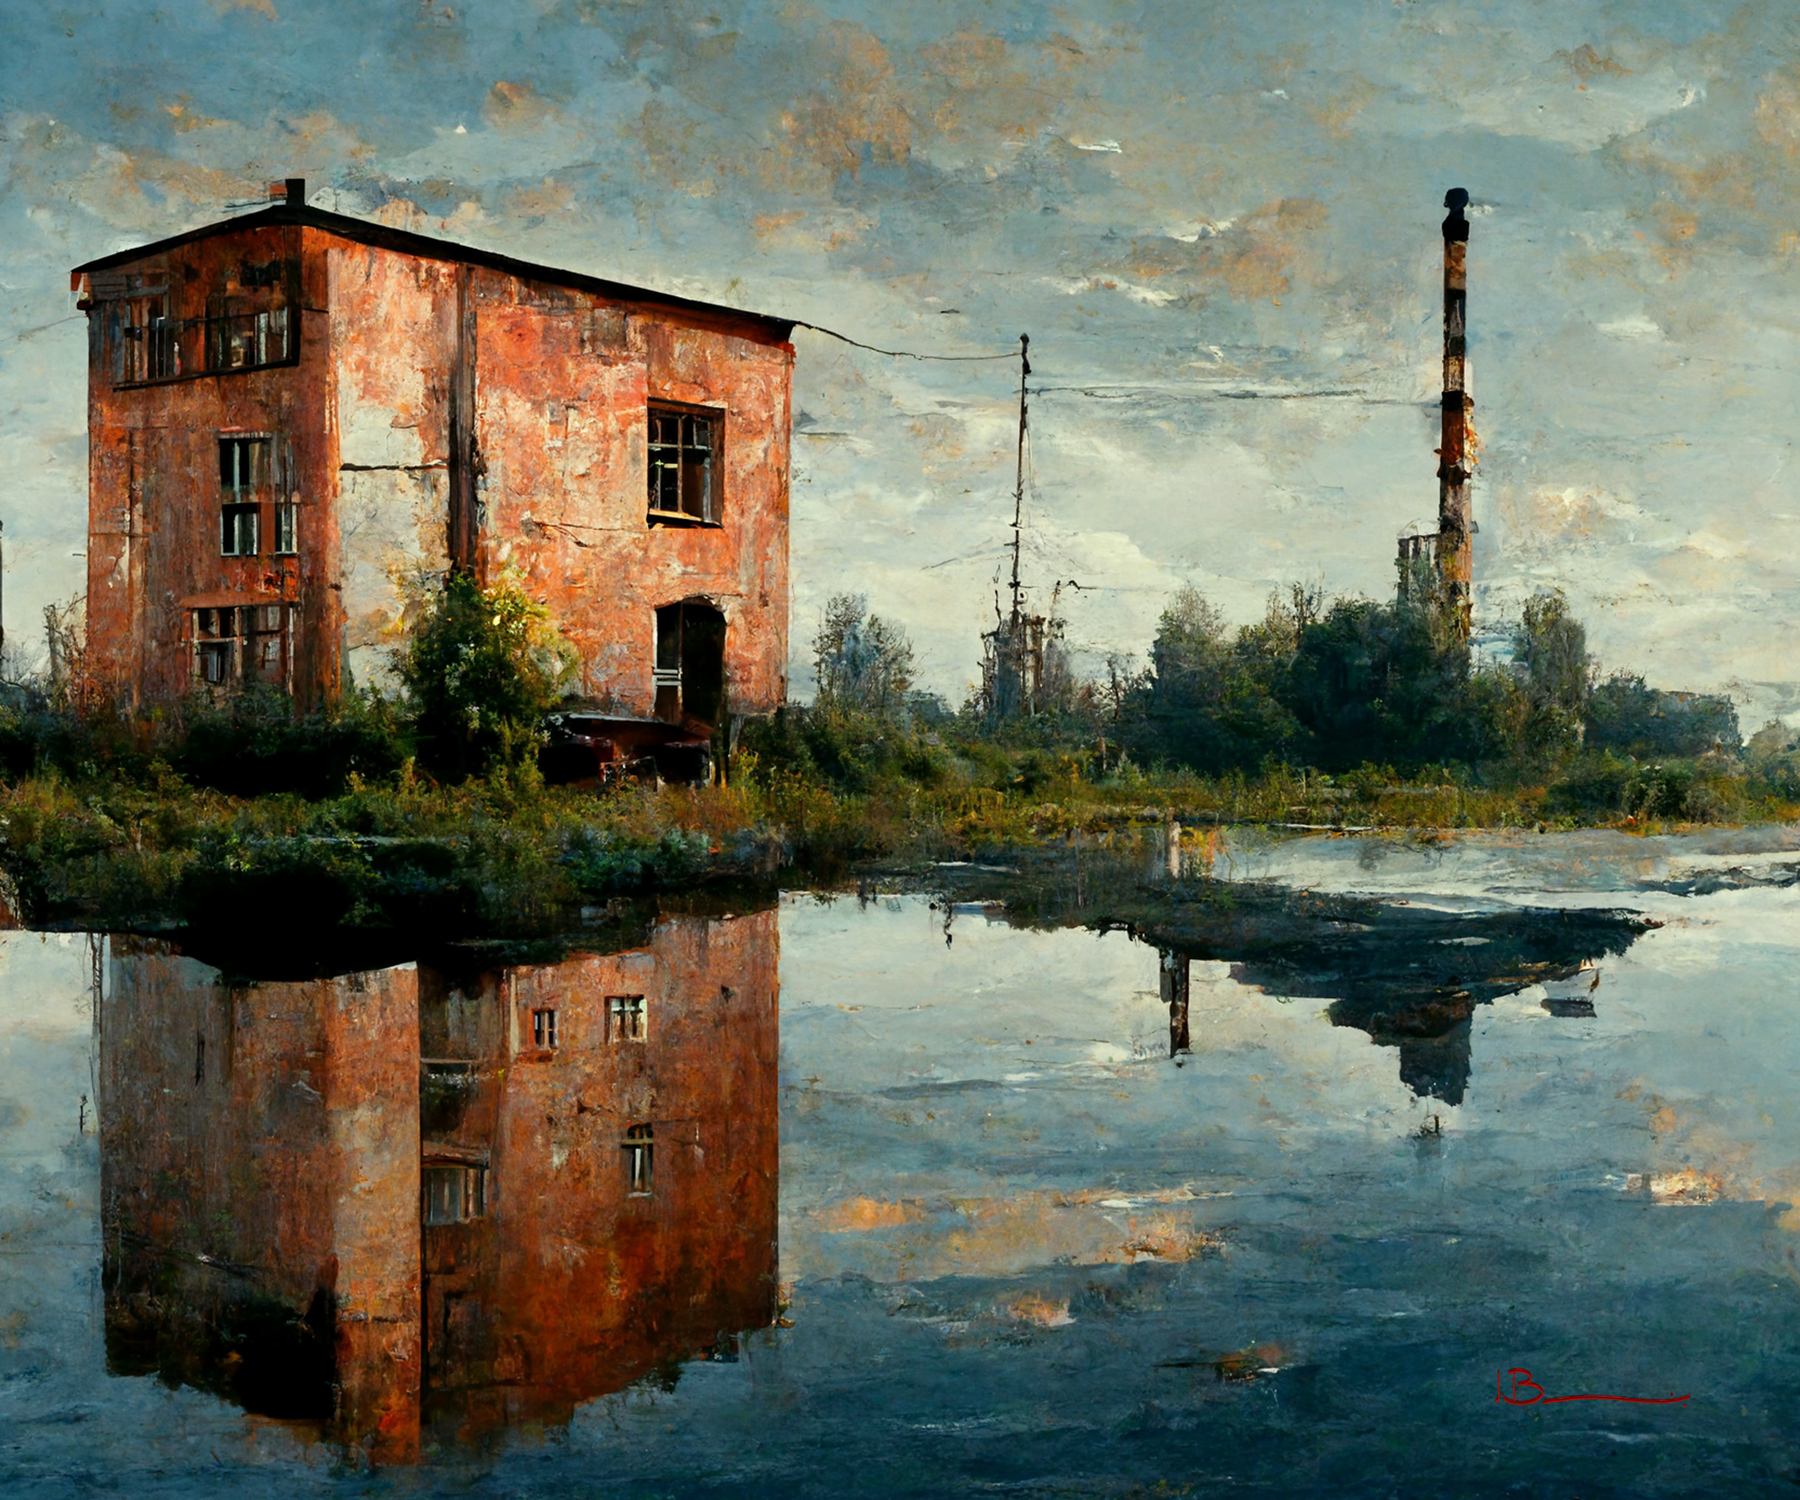 Reflecting Industries